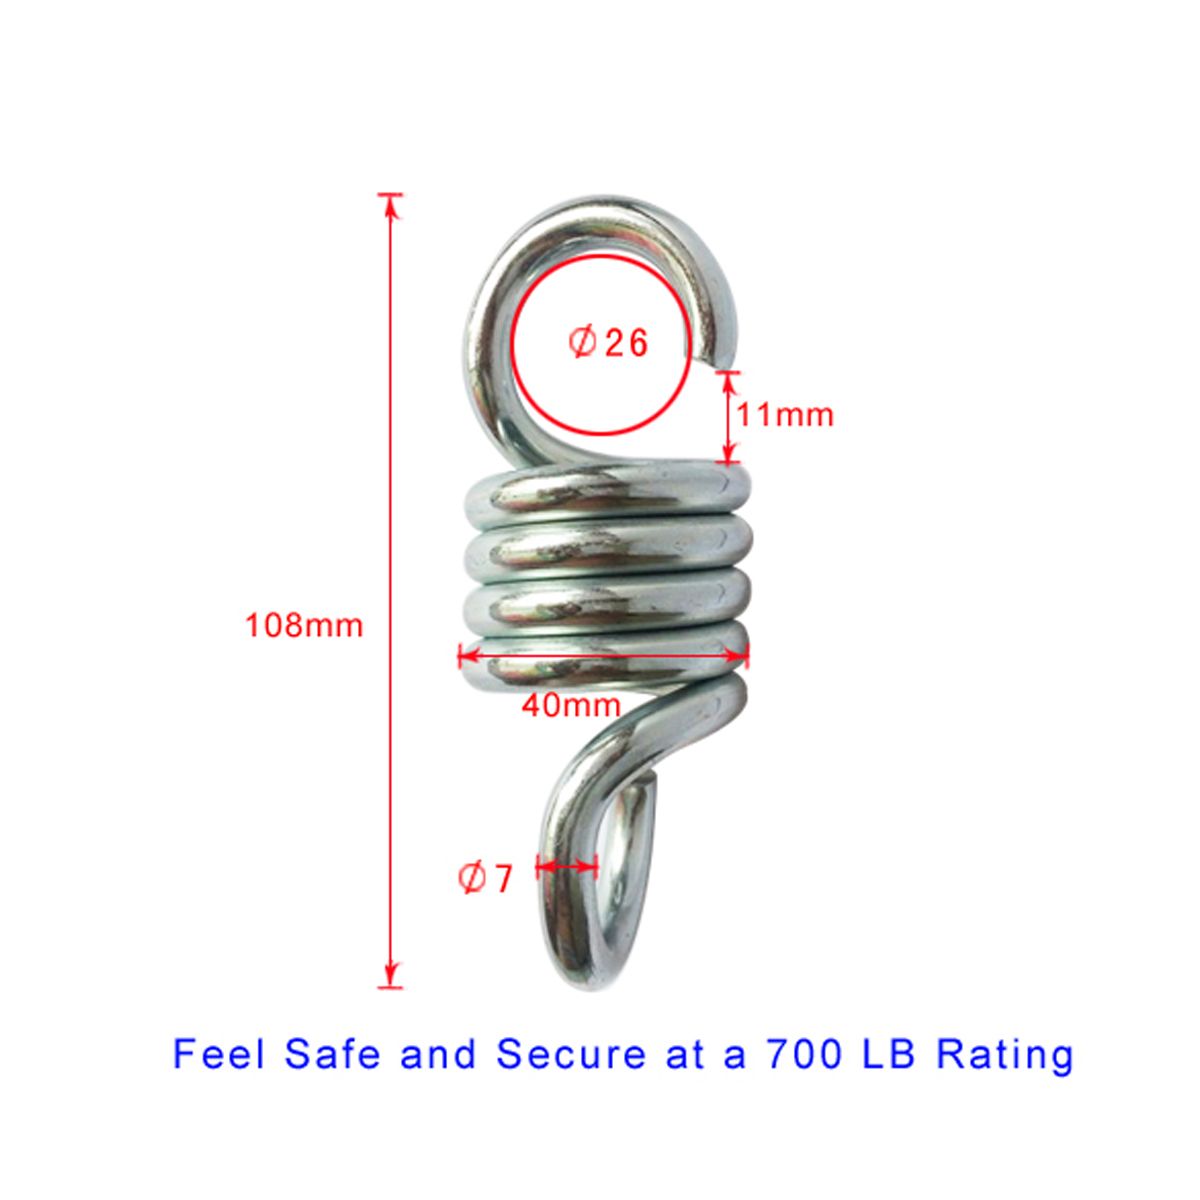 2PCS-Heavy-Duty-Suspension-Hook-Spring-For-2-3-Seat-Hanging-Chair-Garden-Swing-1338489